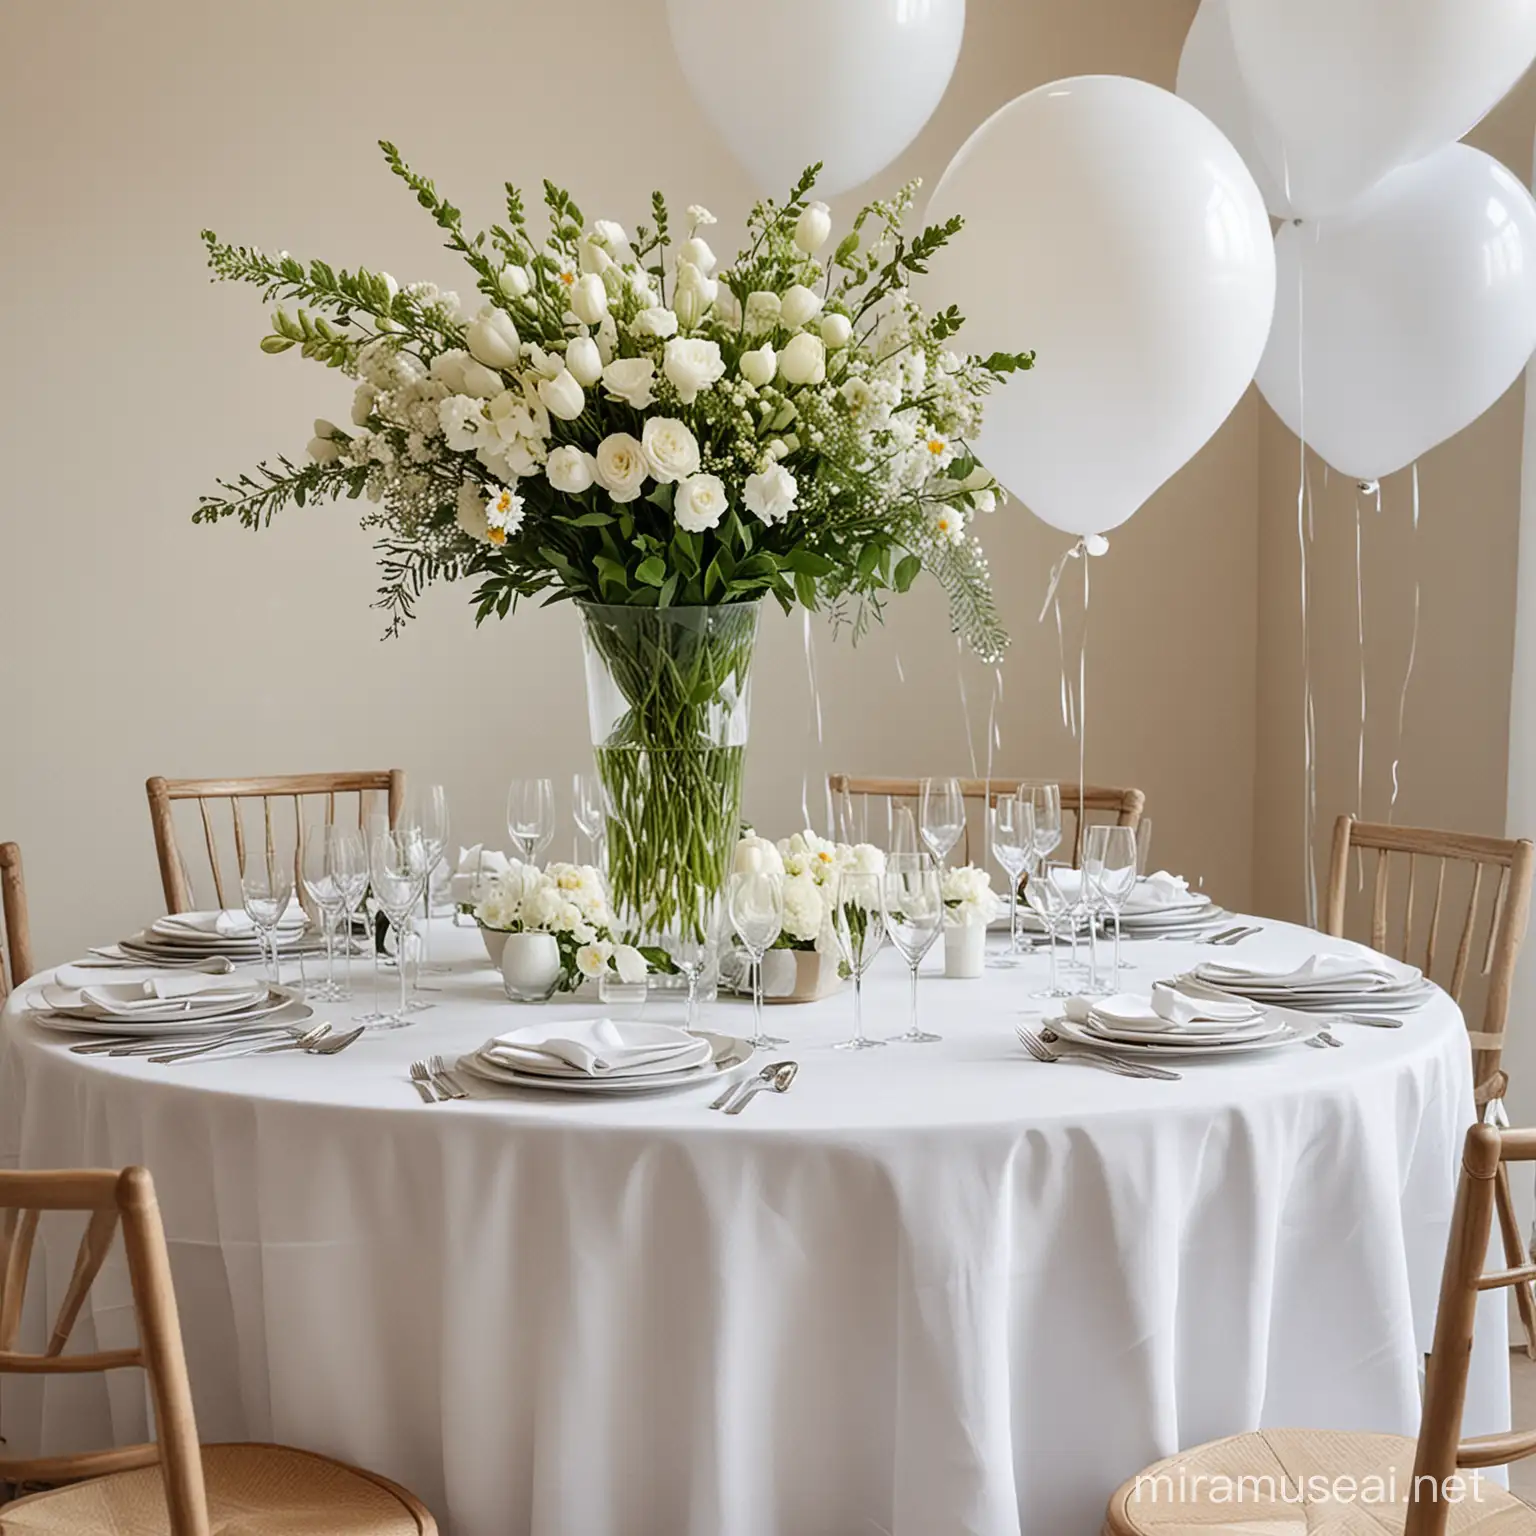 imagine white tablecloths on table with flowers in a vase as a centerpiece with balloons in the background for a party. 